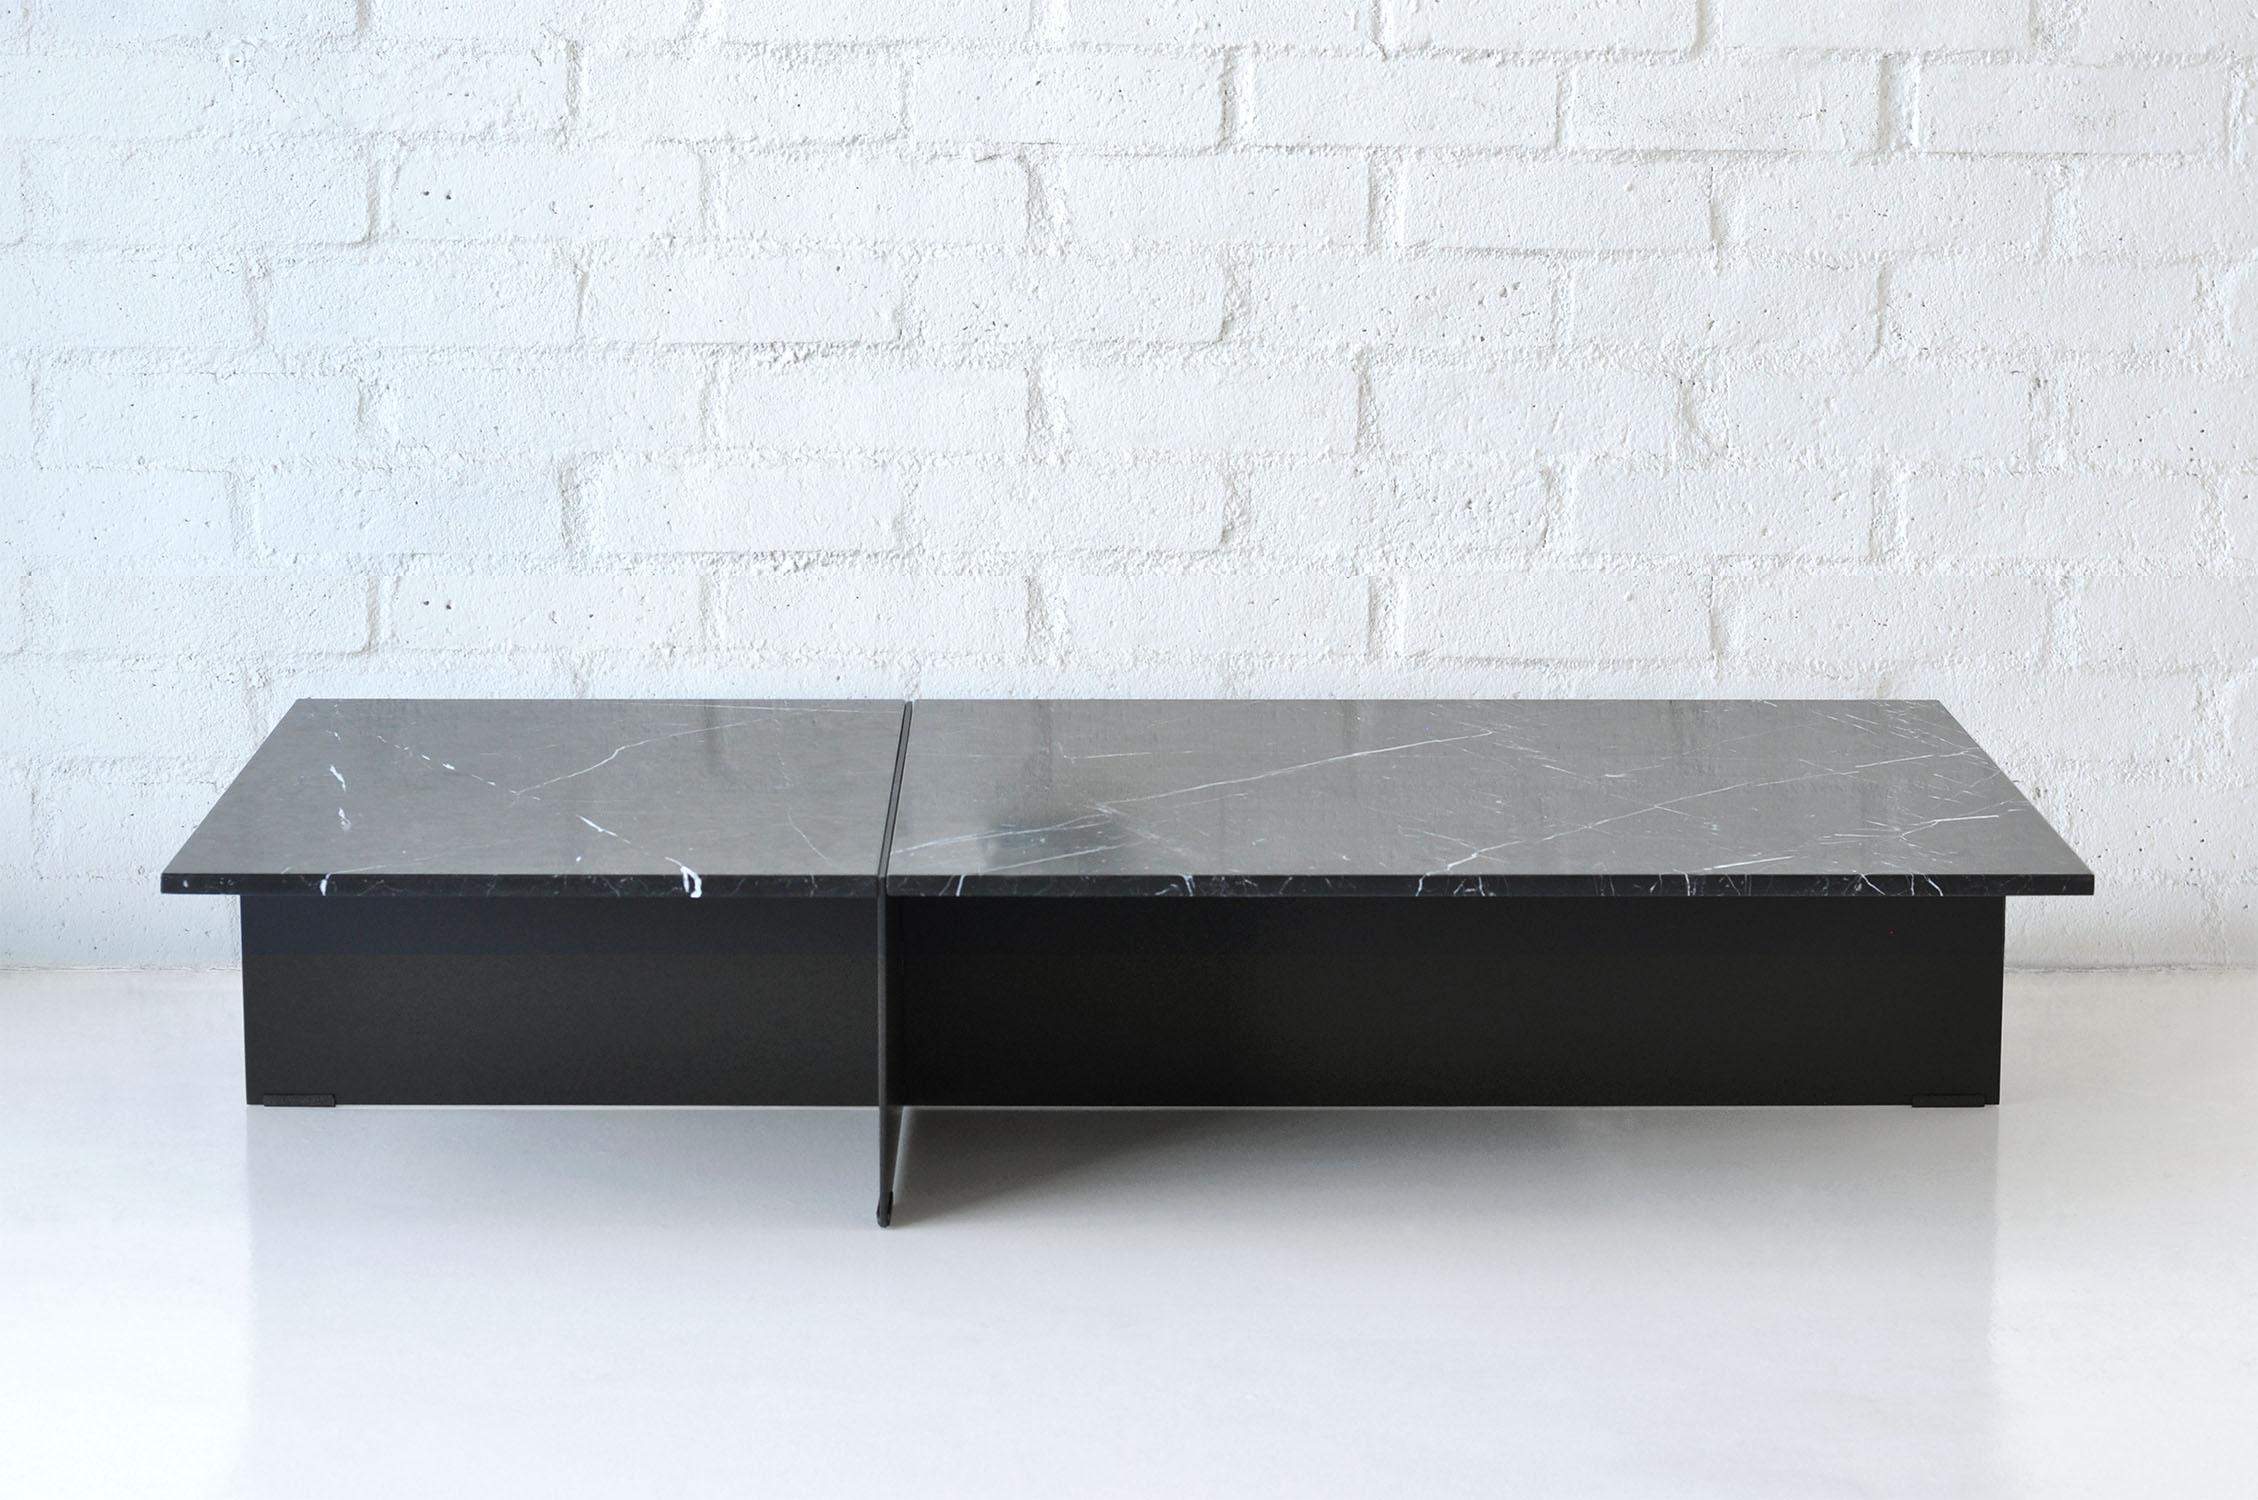 Listed price is for the Division Coffee Table- Rectangular coffee table with either a travertine, white carrara, or negro marquna top, and Flat Black or Flat White powder coat base. 

Prices exclude packing.

Collection of architecturally